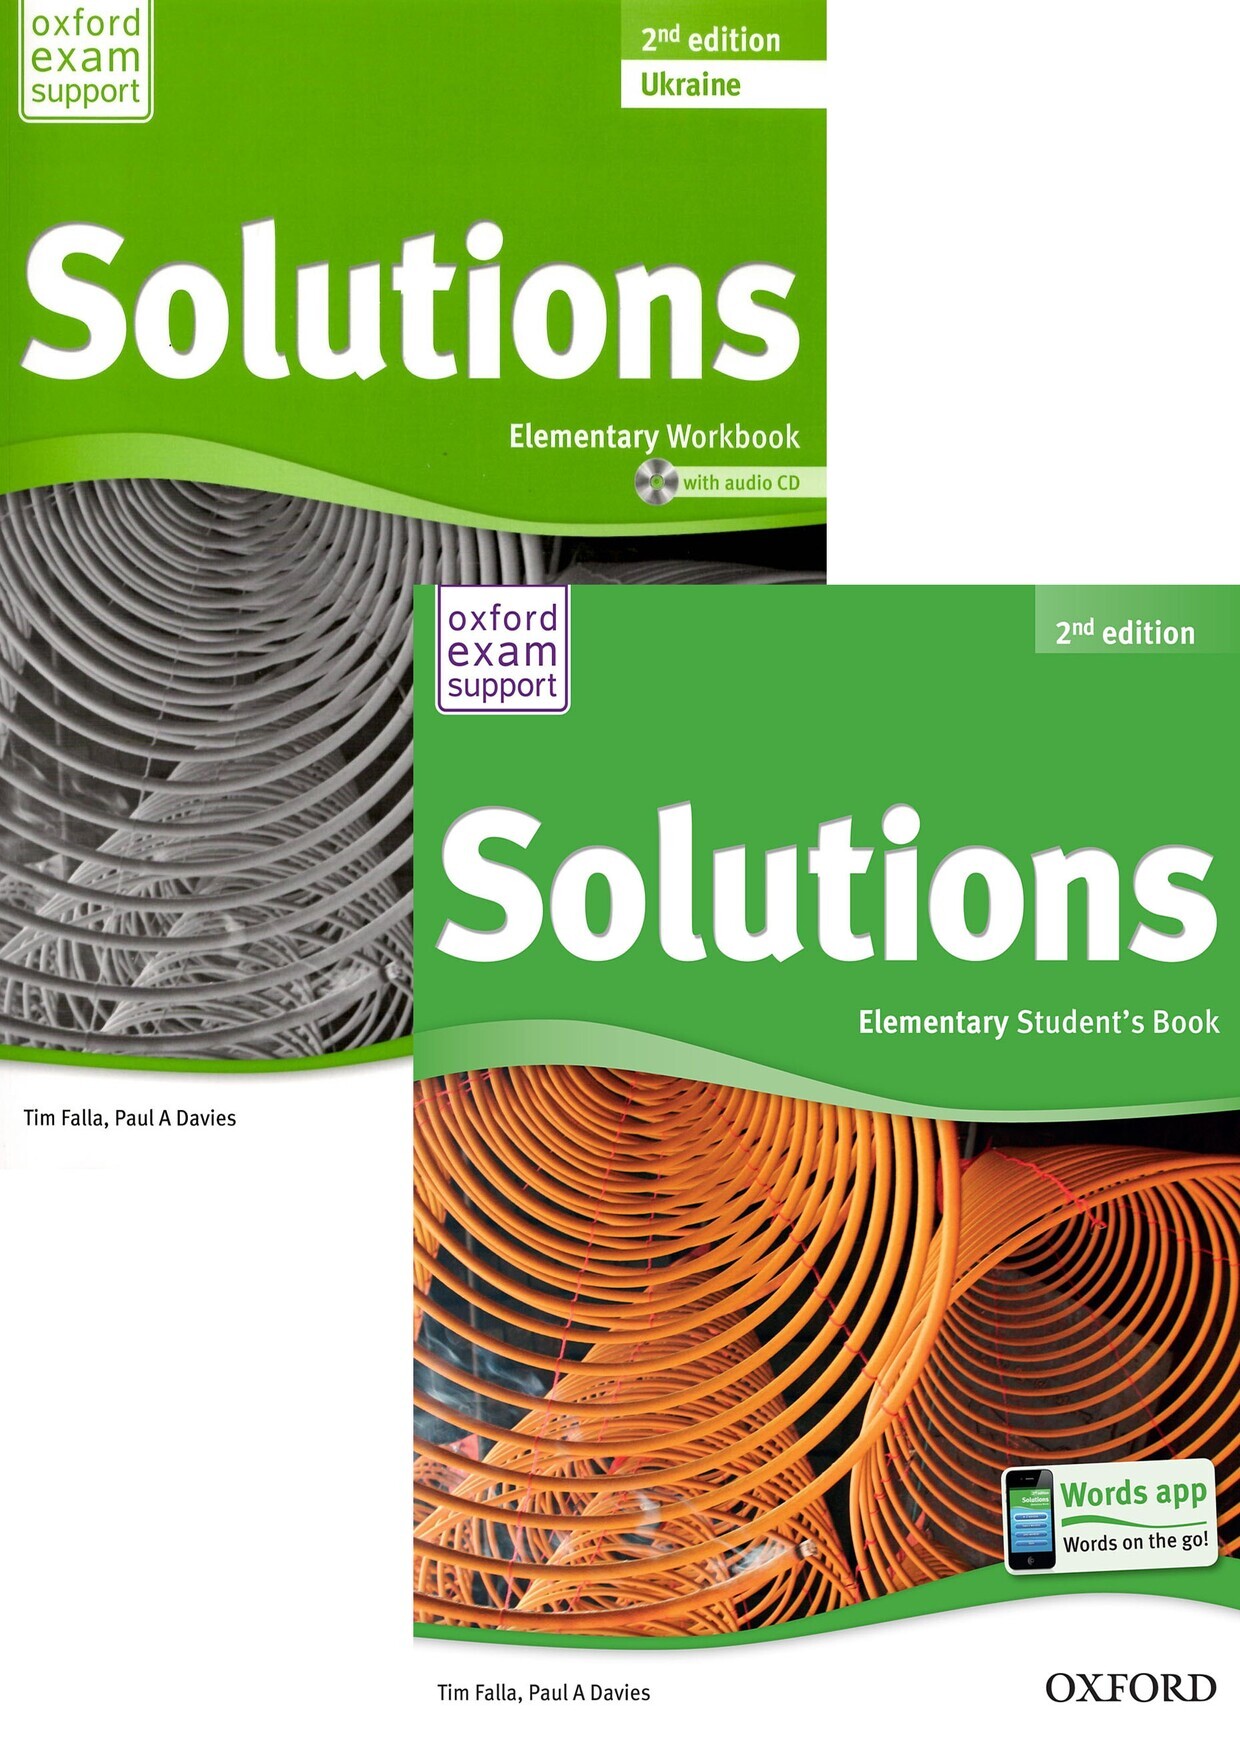 Solutions elementary 6 класс. Учебник solutions Elementary Workbook. Solutions Elementary 2nd Edition. Solutions Elementary 2nd Edition Photocopiable. Учебник third Edition solutions Elementary student's book.